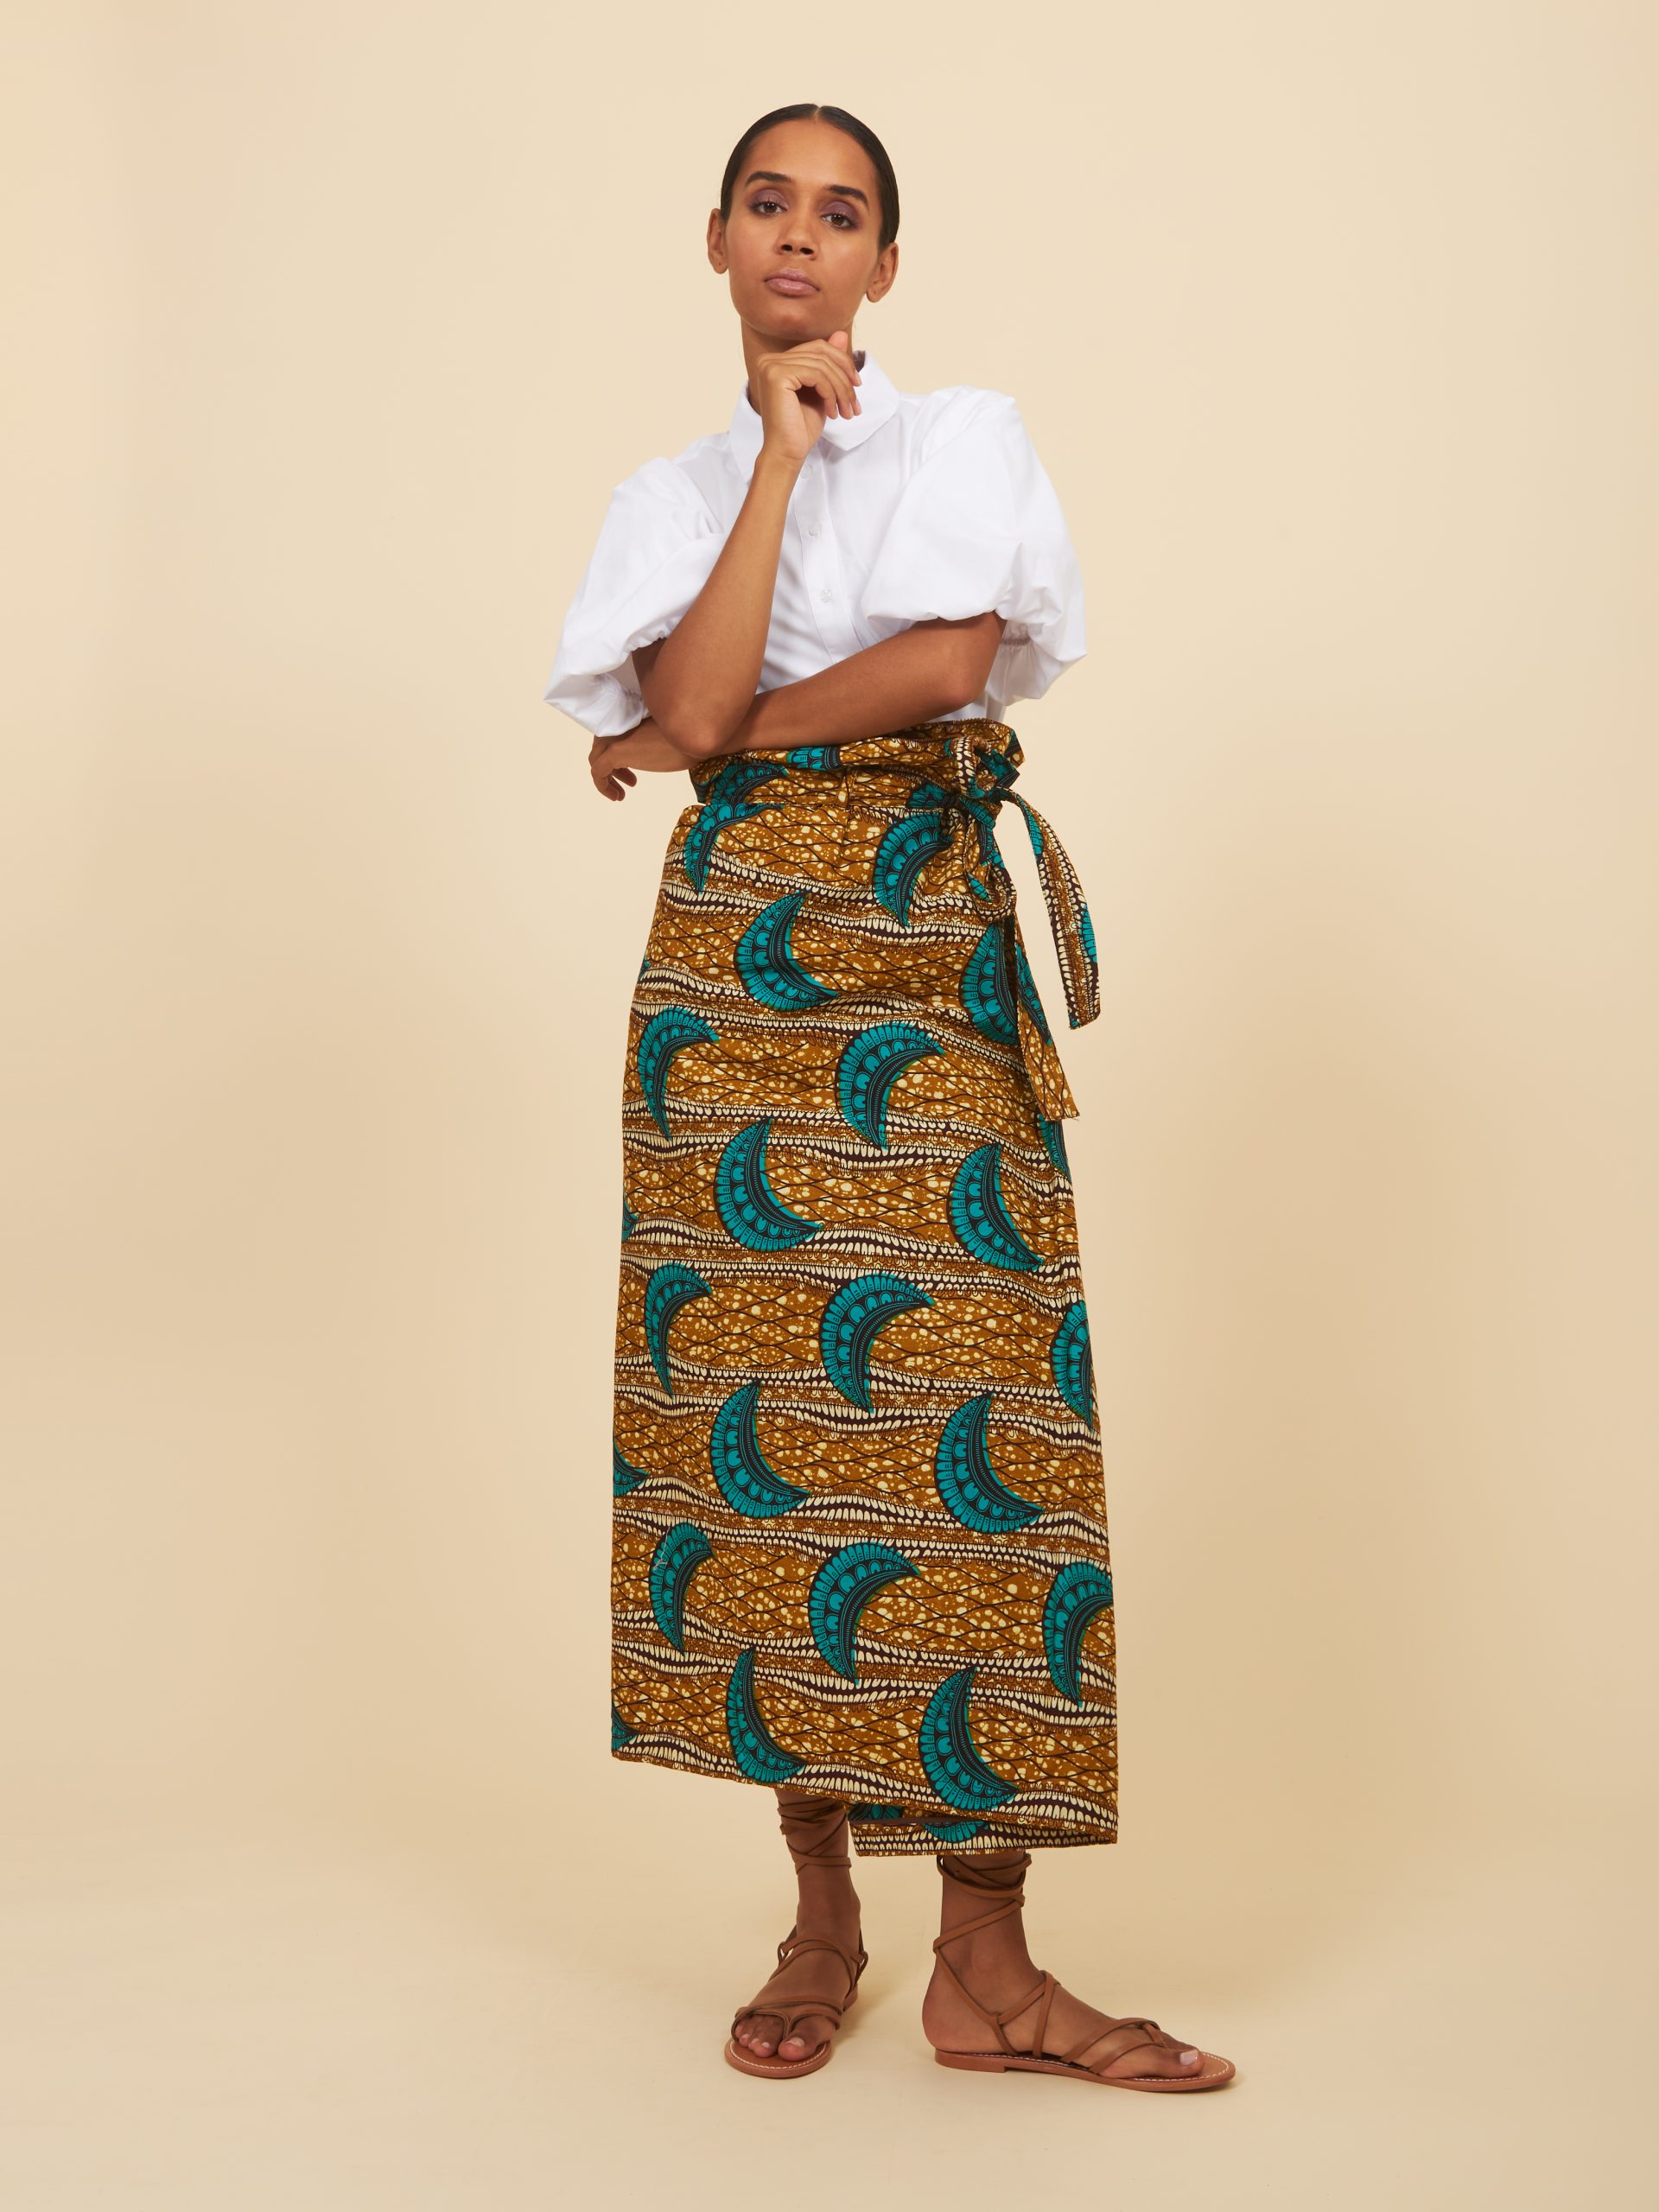 Skirt Portefeuille in gold and green crescents pattern - Odile Jacobs